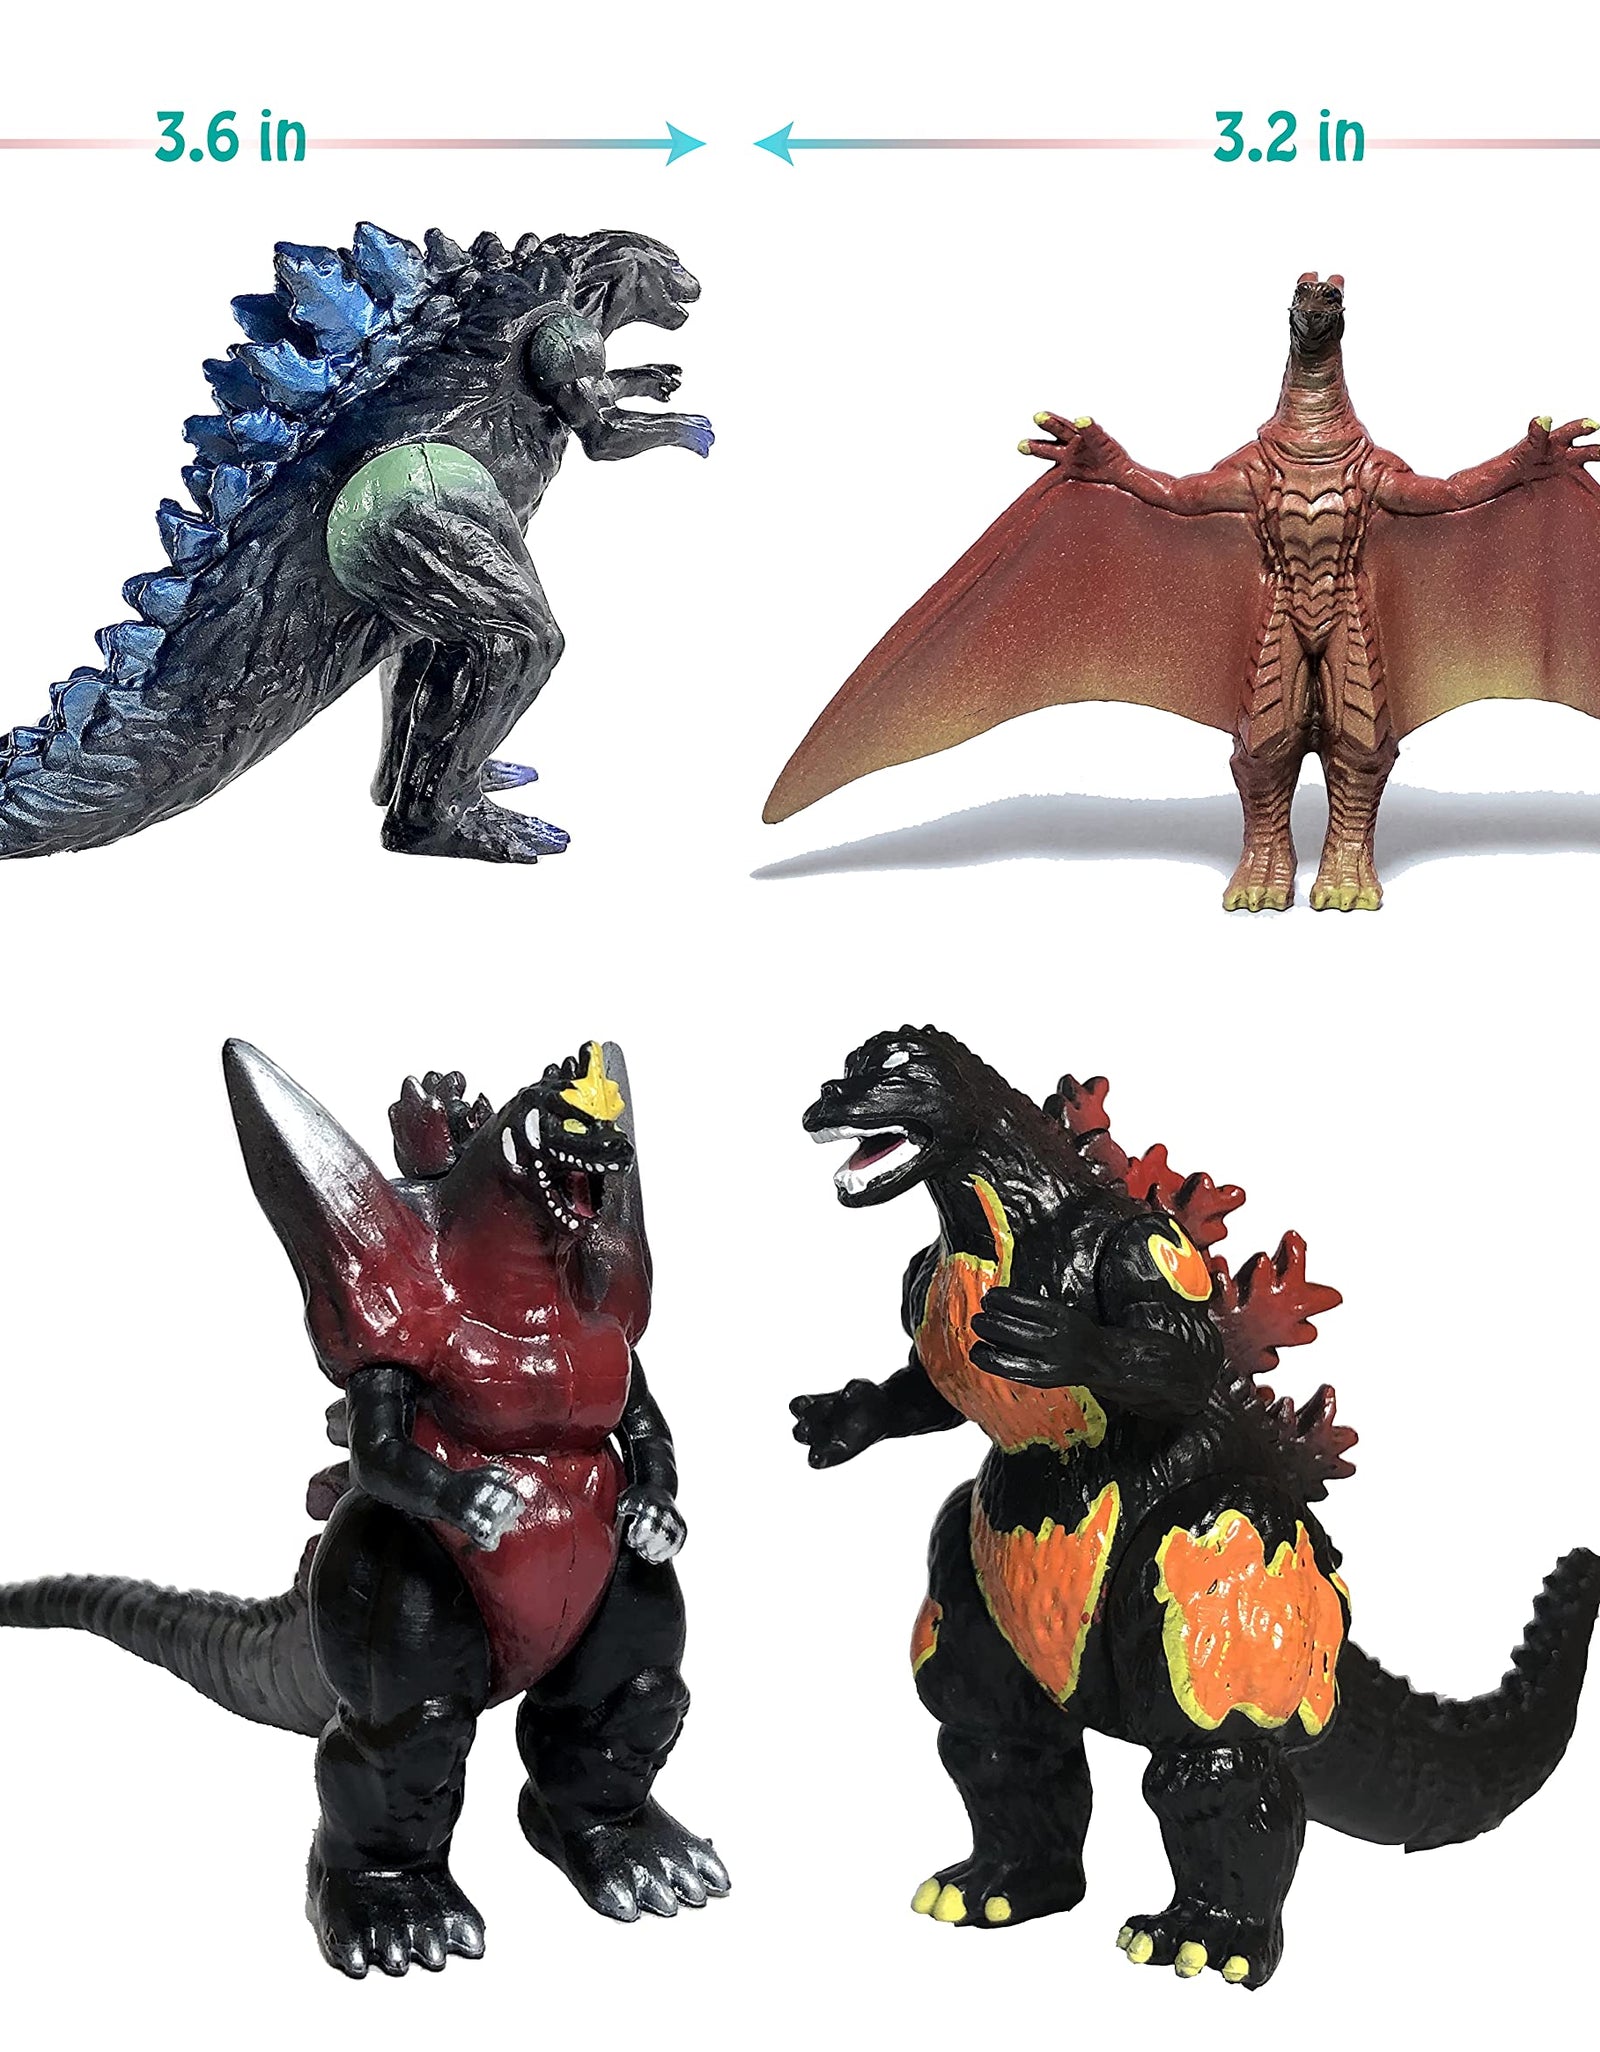 EZFun Set of 10 Godzilla Toys with Carry Bag, Movable Joint Action Figures 2019, King of the Monsters Mini Dinosaur Mothra Imago Burning Heisei Mecha Ghidorah Playsets Kids Birthday Cake Toppers Pack